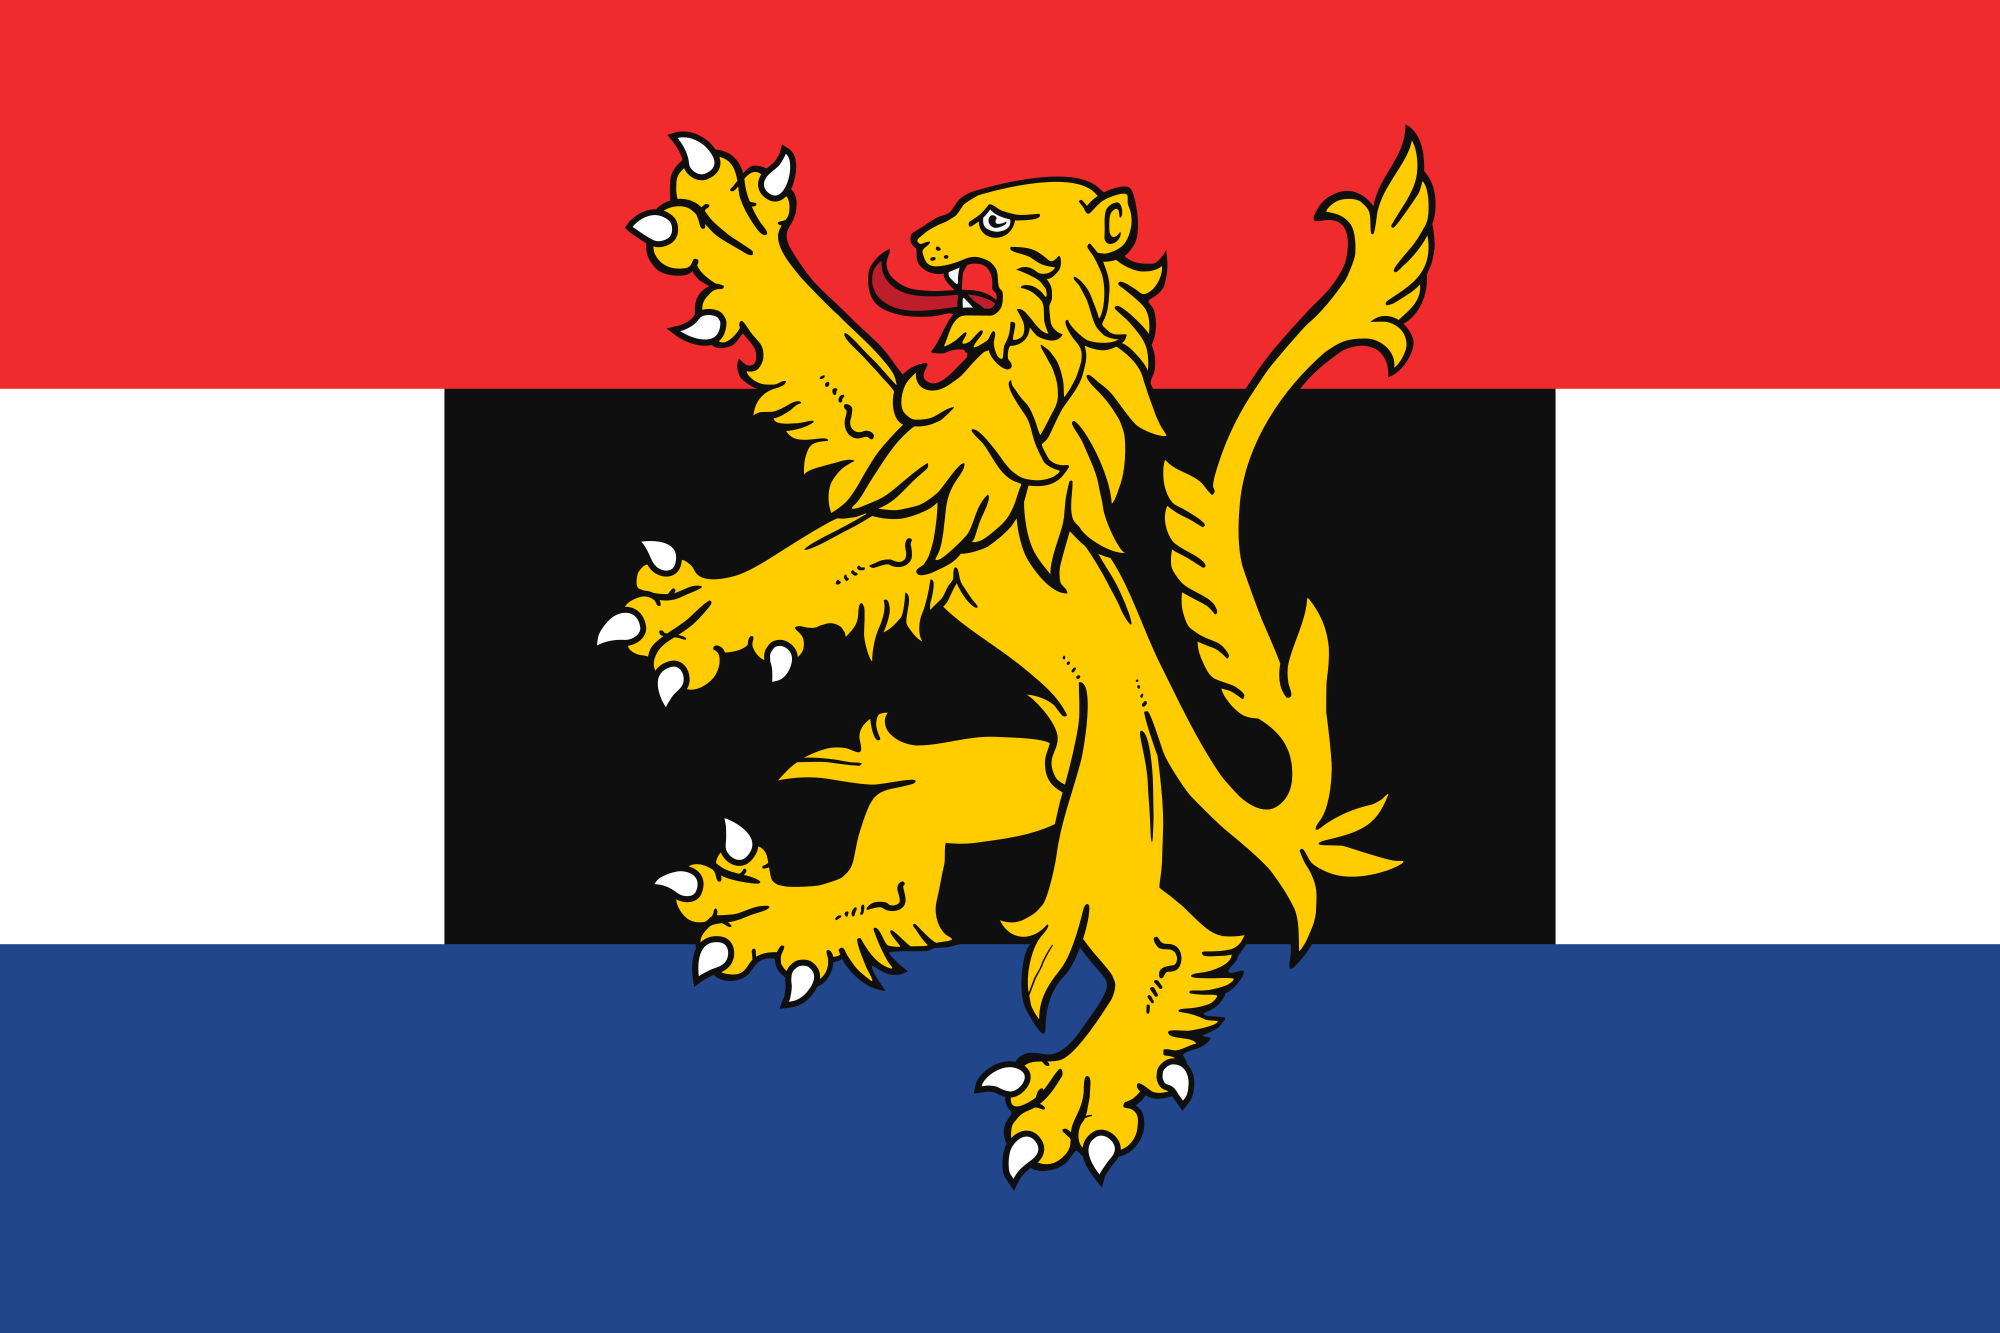 This is the flag of the Benelux countries